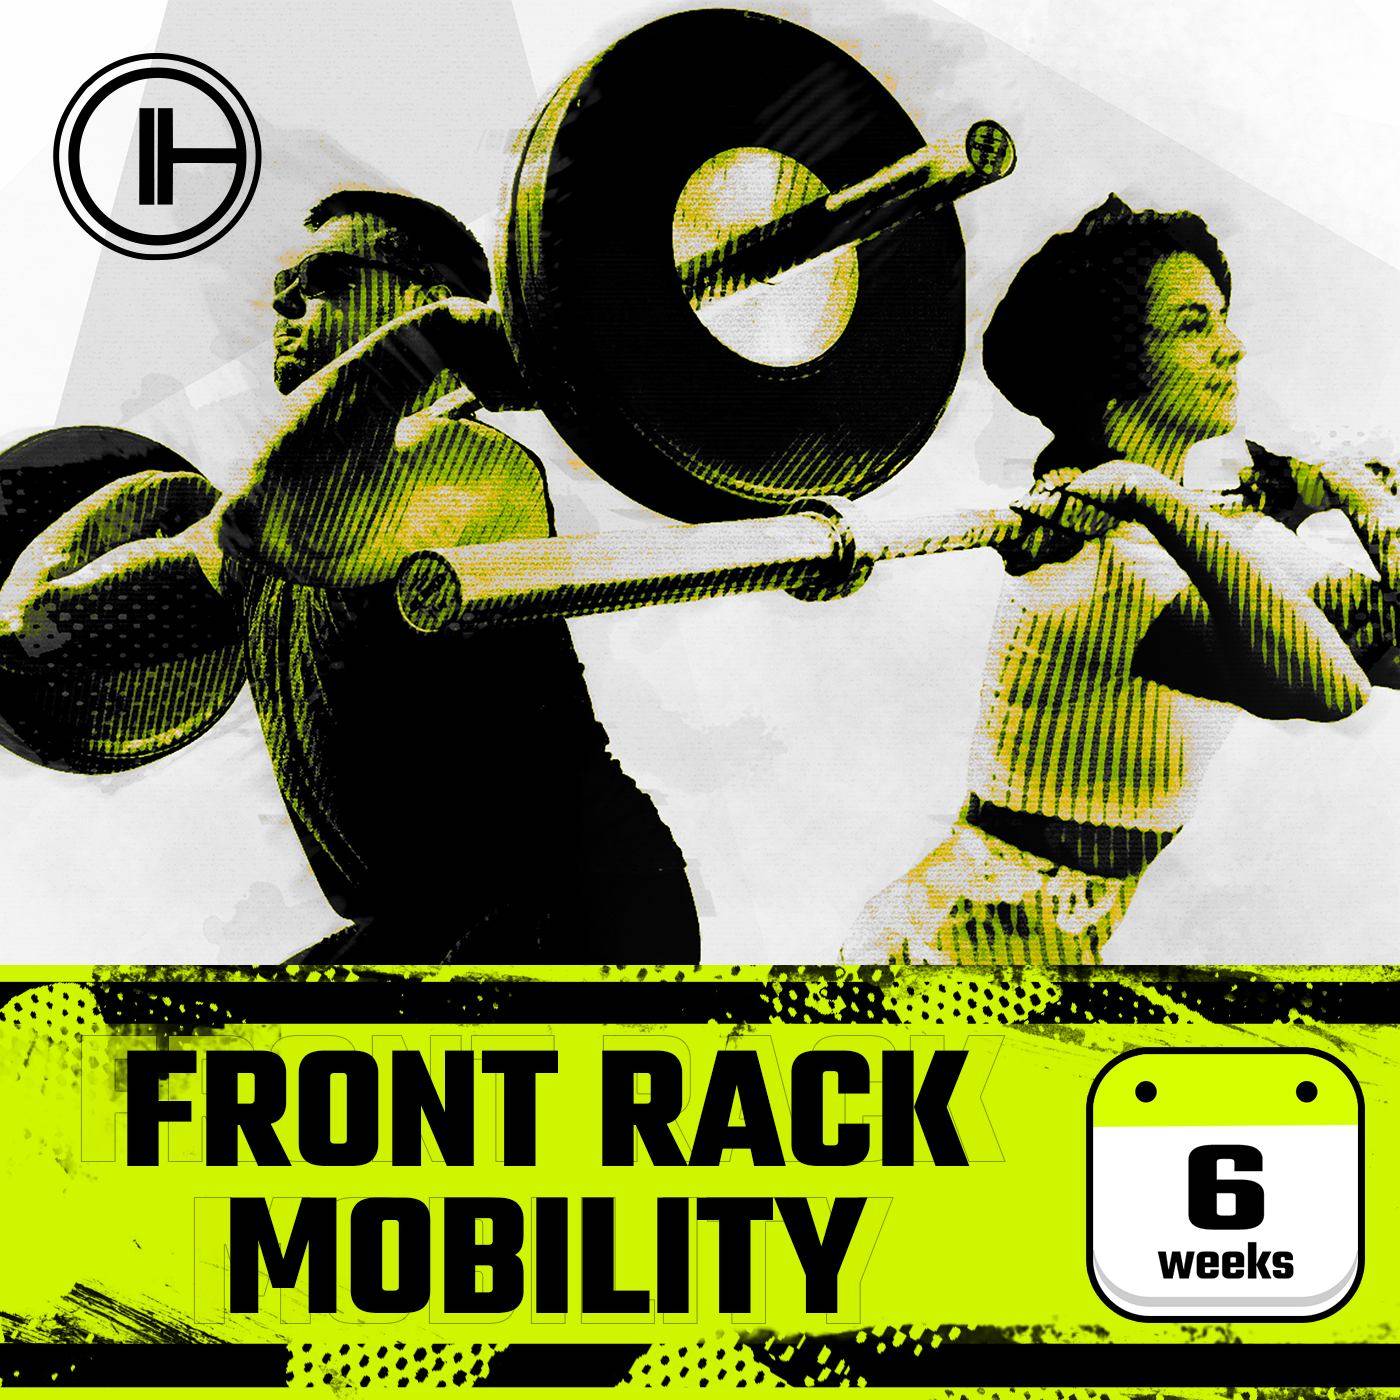 FRONT RACK MOBILITY